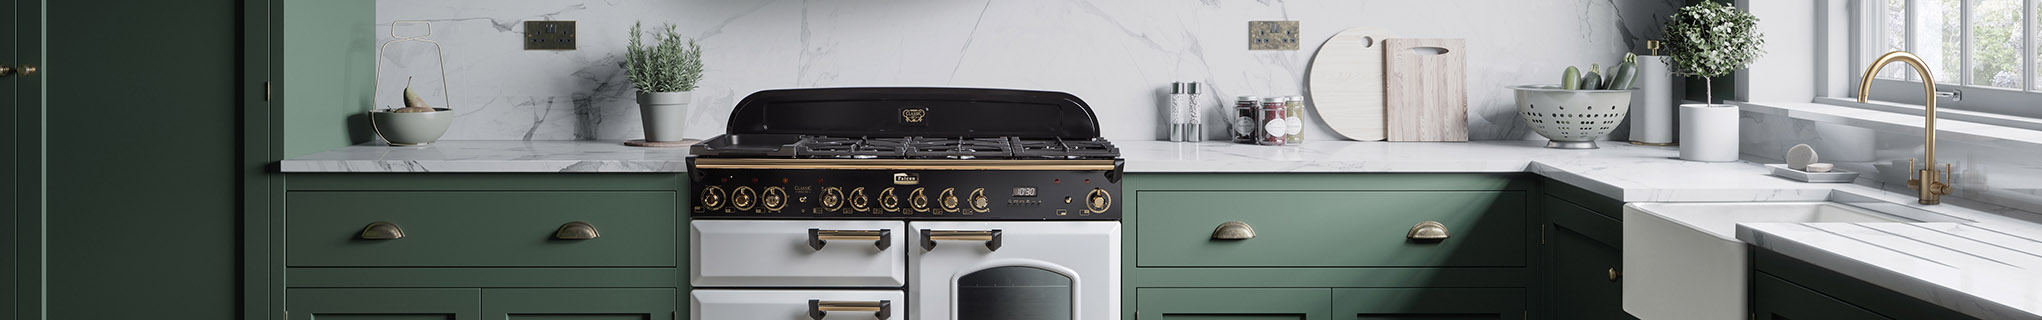 Falcon Classic Deluxe in white with brass trim in green kitchen 